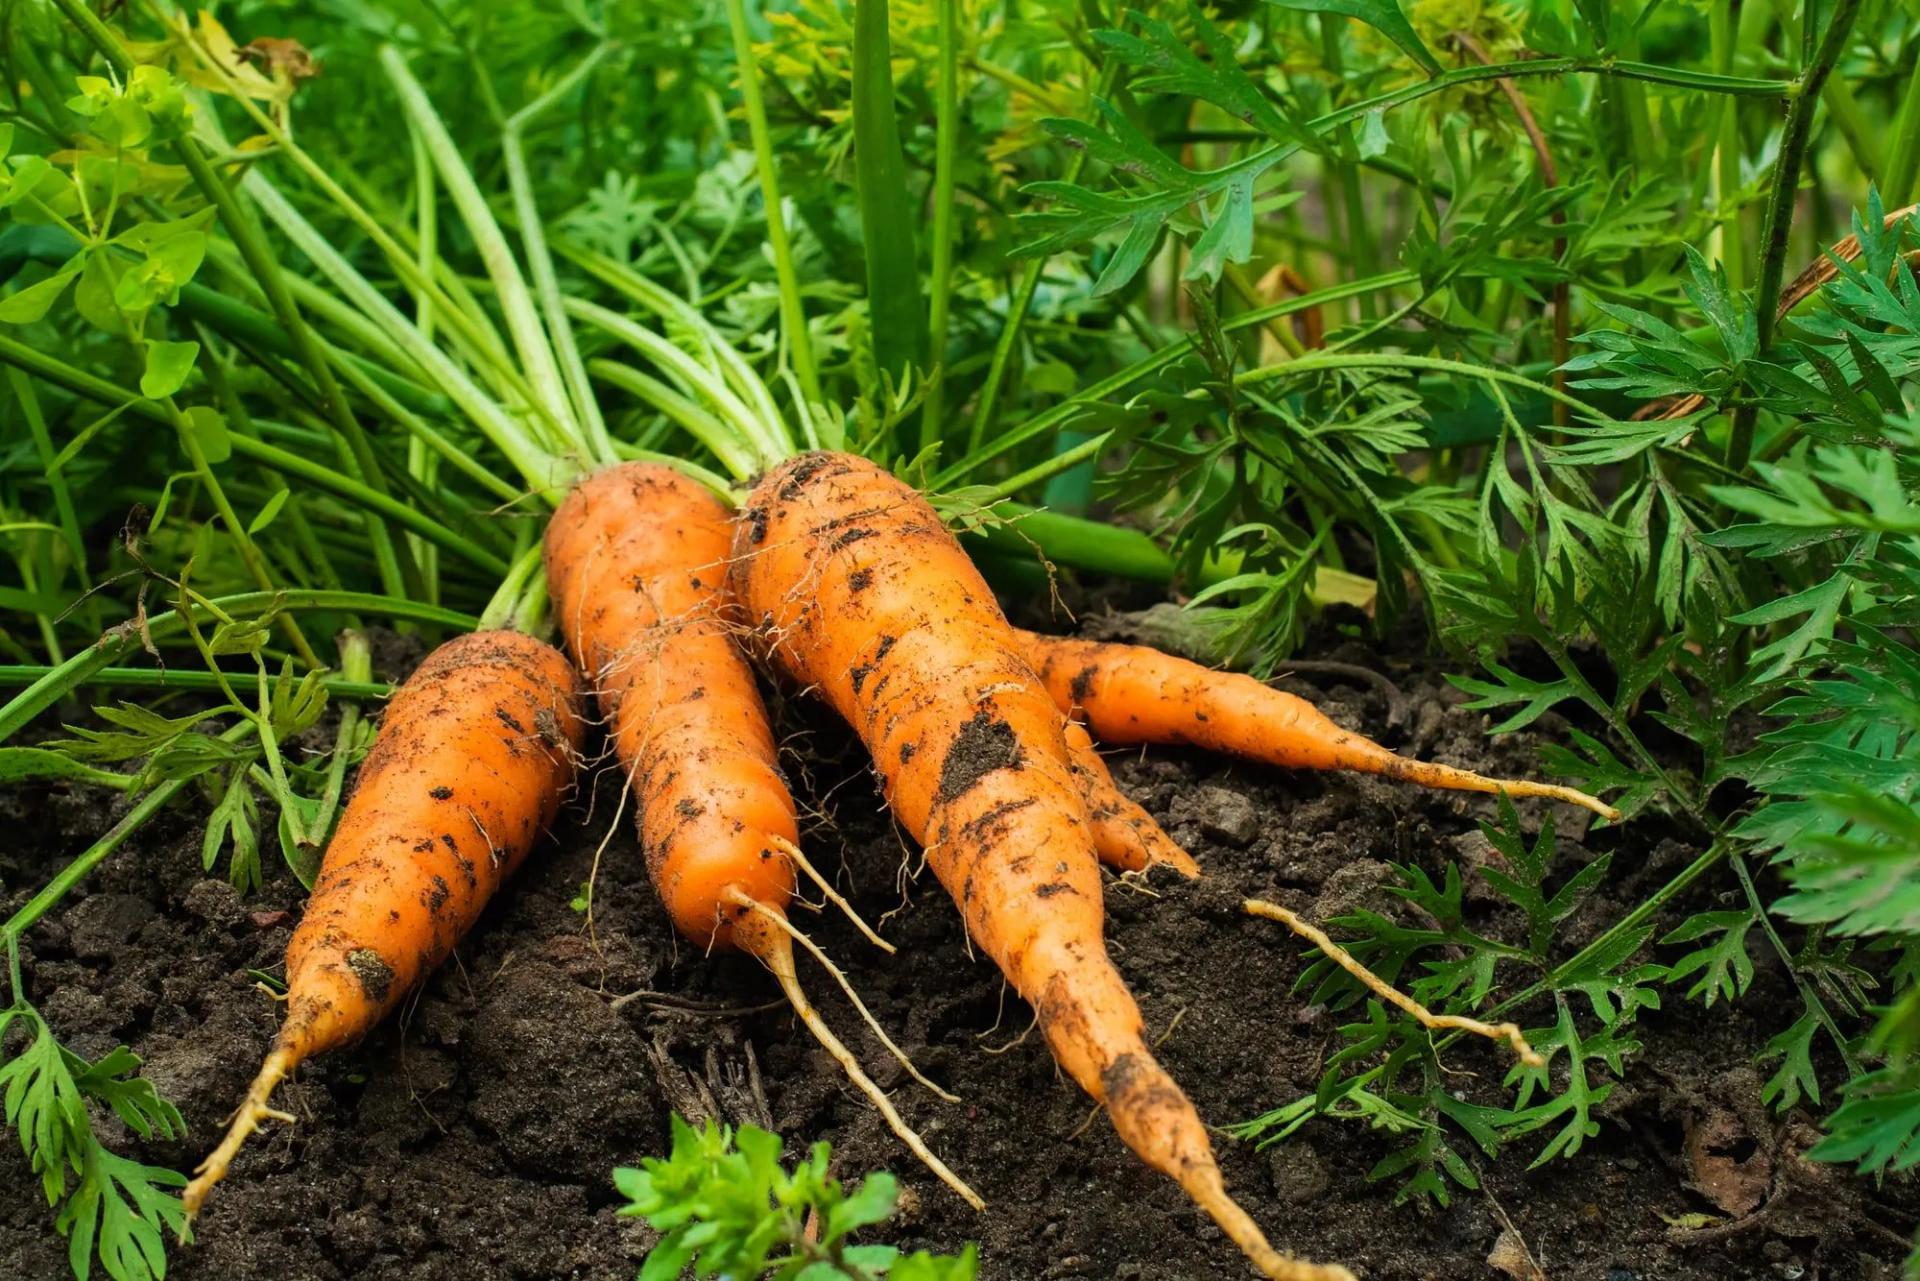 Grown Carrots on the Ground